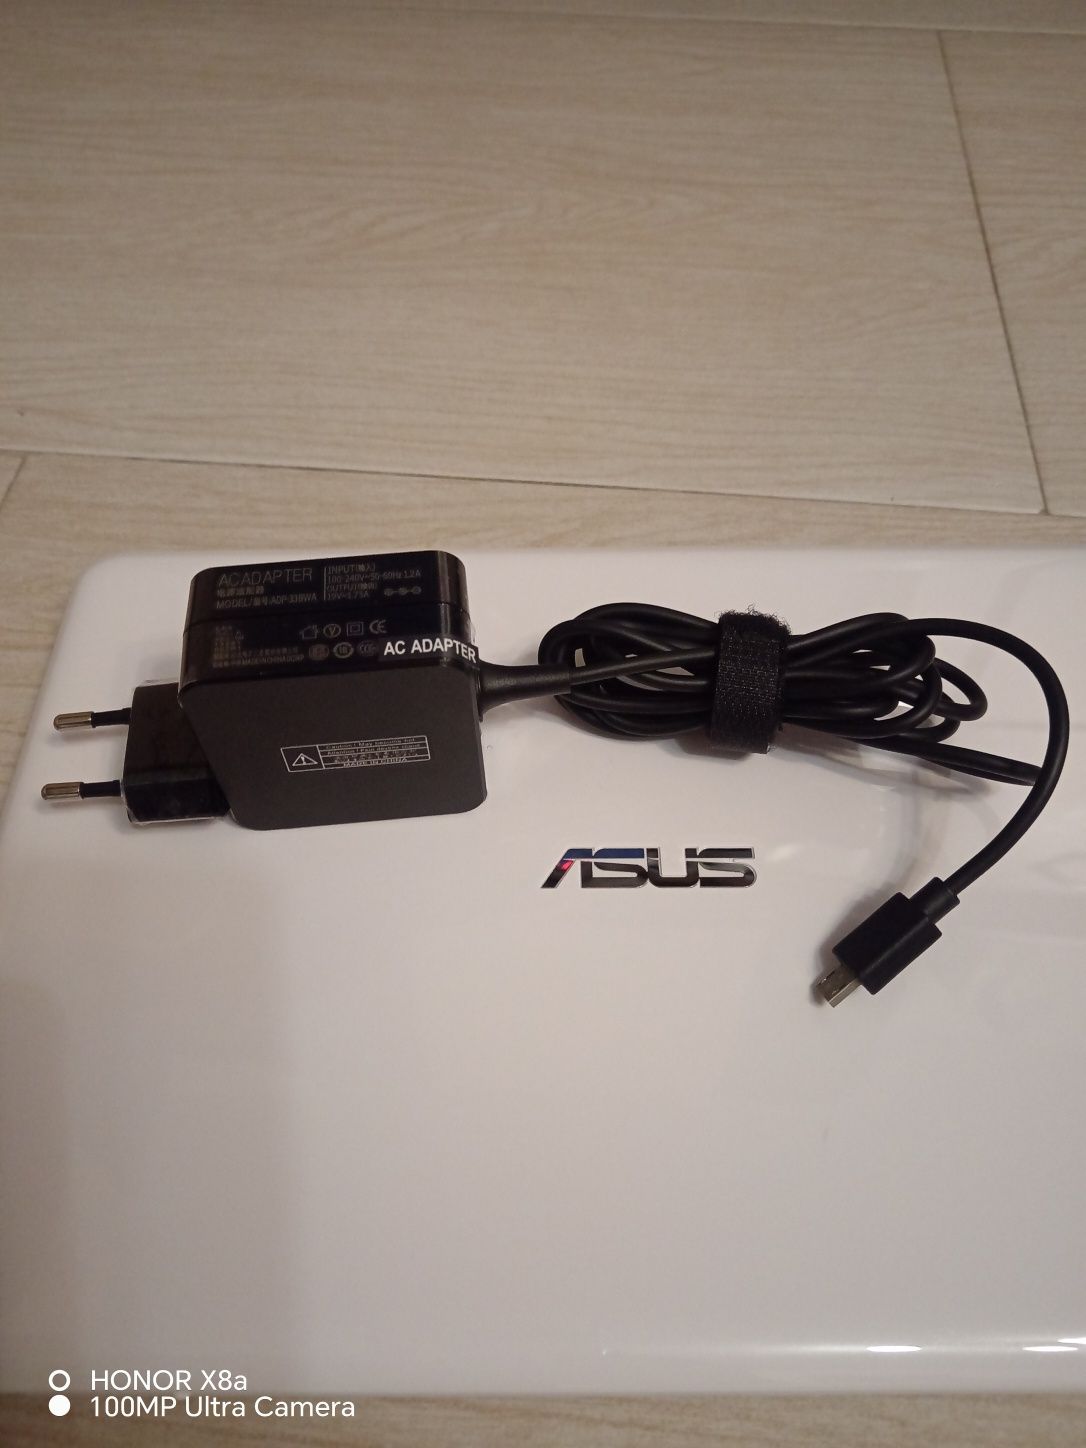 AC ADAPTER за лаптоп Asus